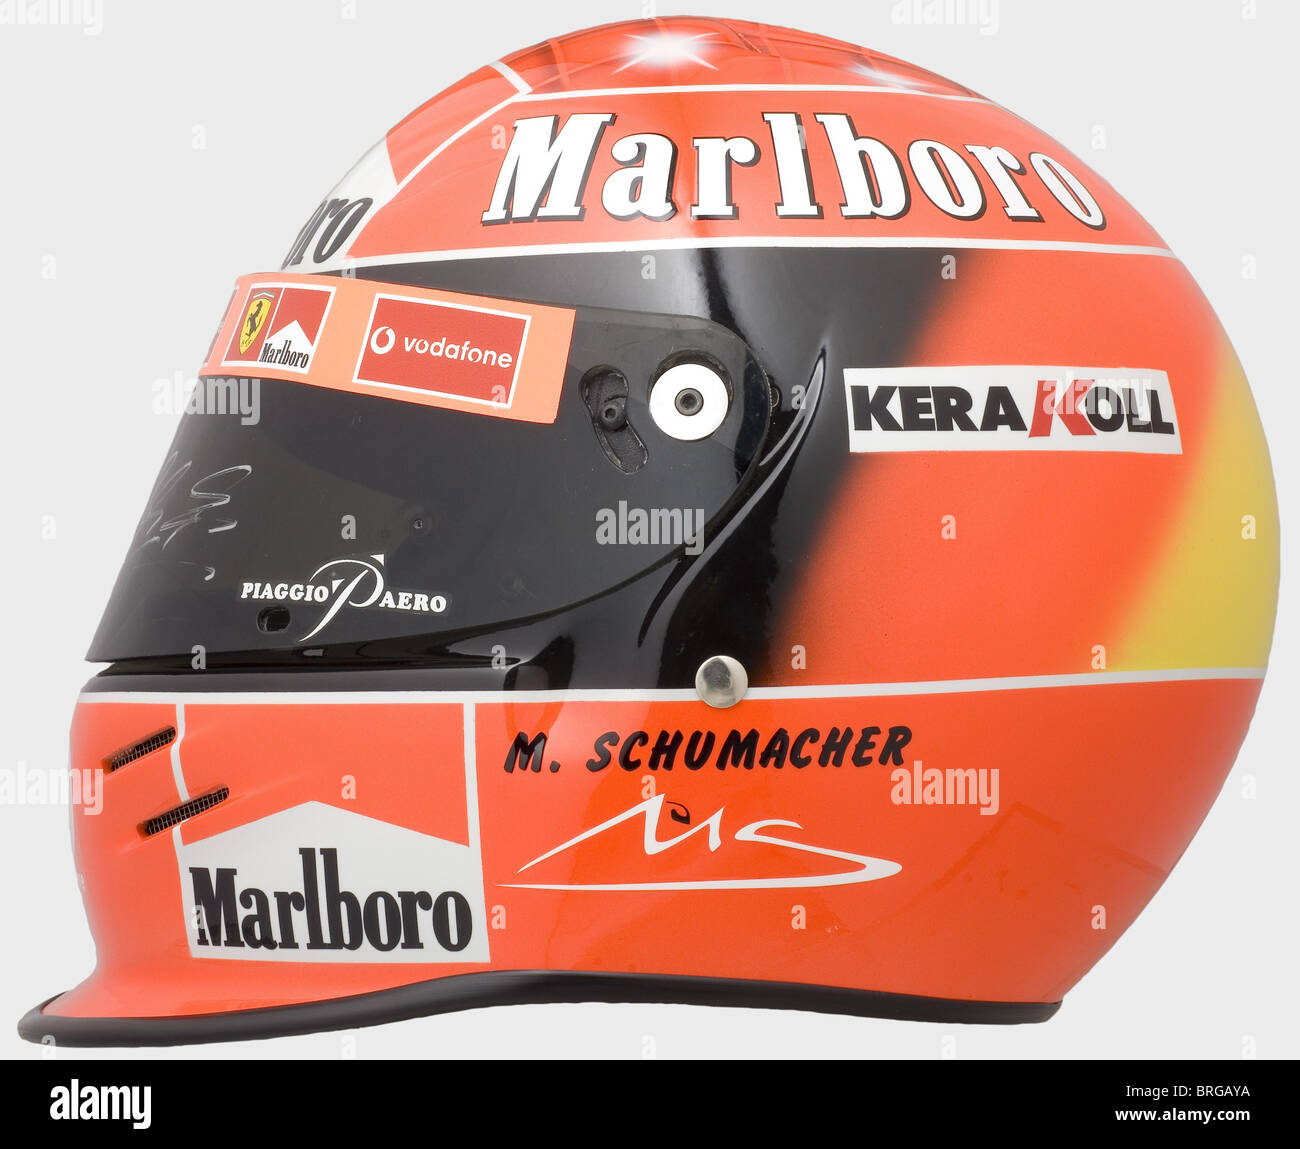 Michael Schumacher,a racing helmet of the seven-time Formula 1 world  champion,2002 season The visor with signs of use,handsigned by Michael  Schumacher.Authentically produced in limited quantity,this authorised  replica bears a special airbrush painting